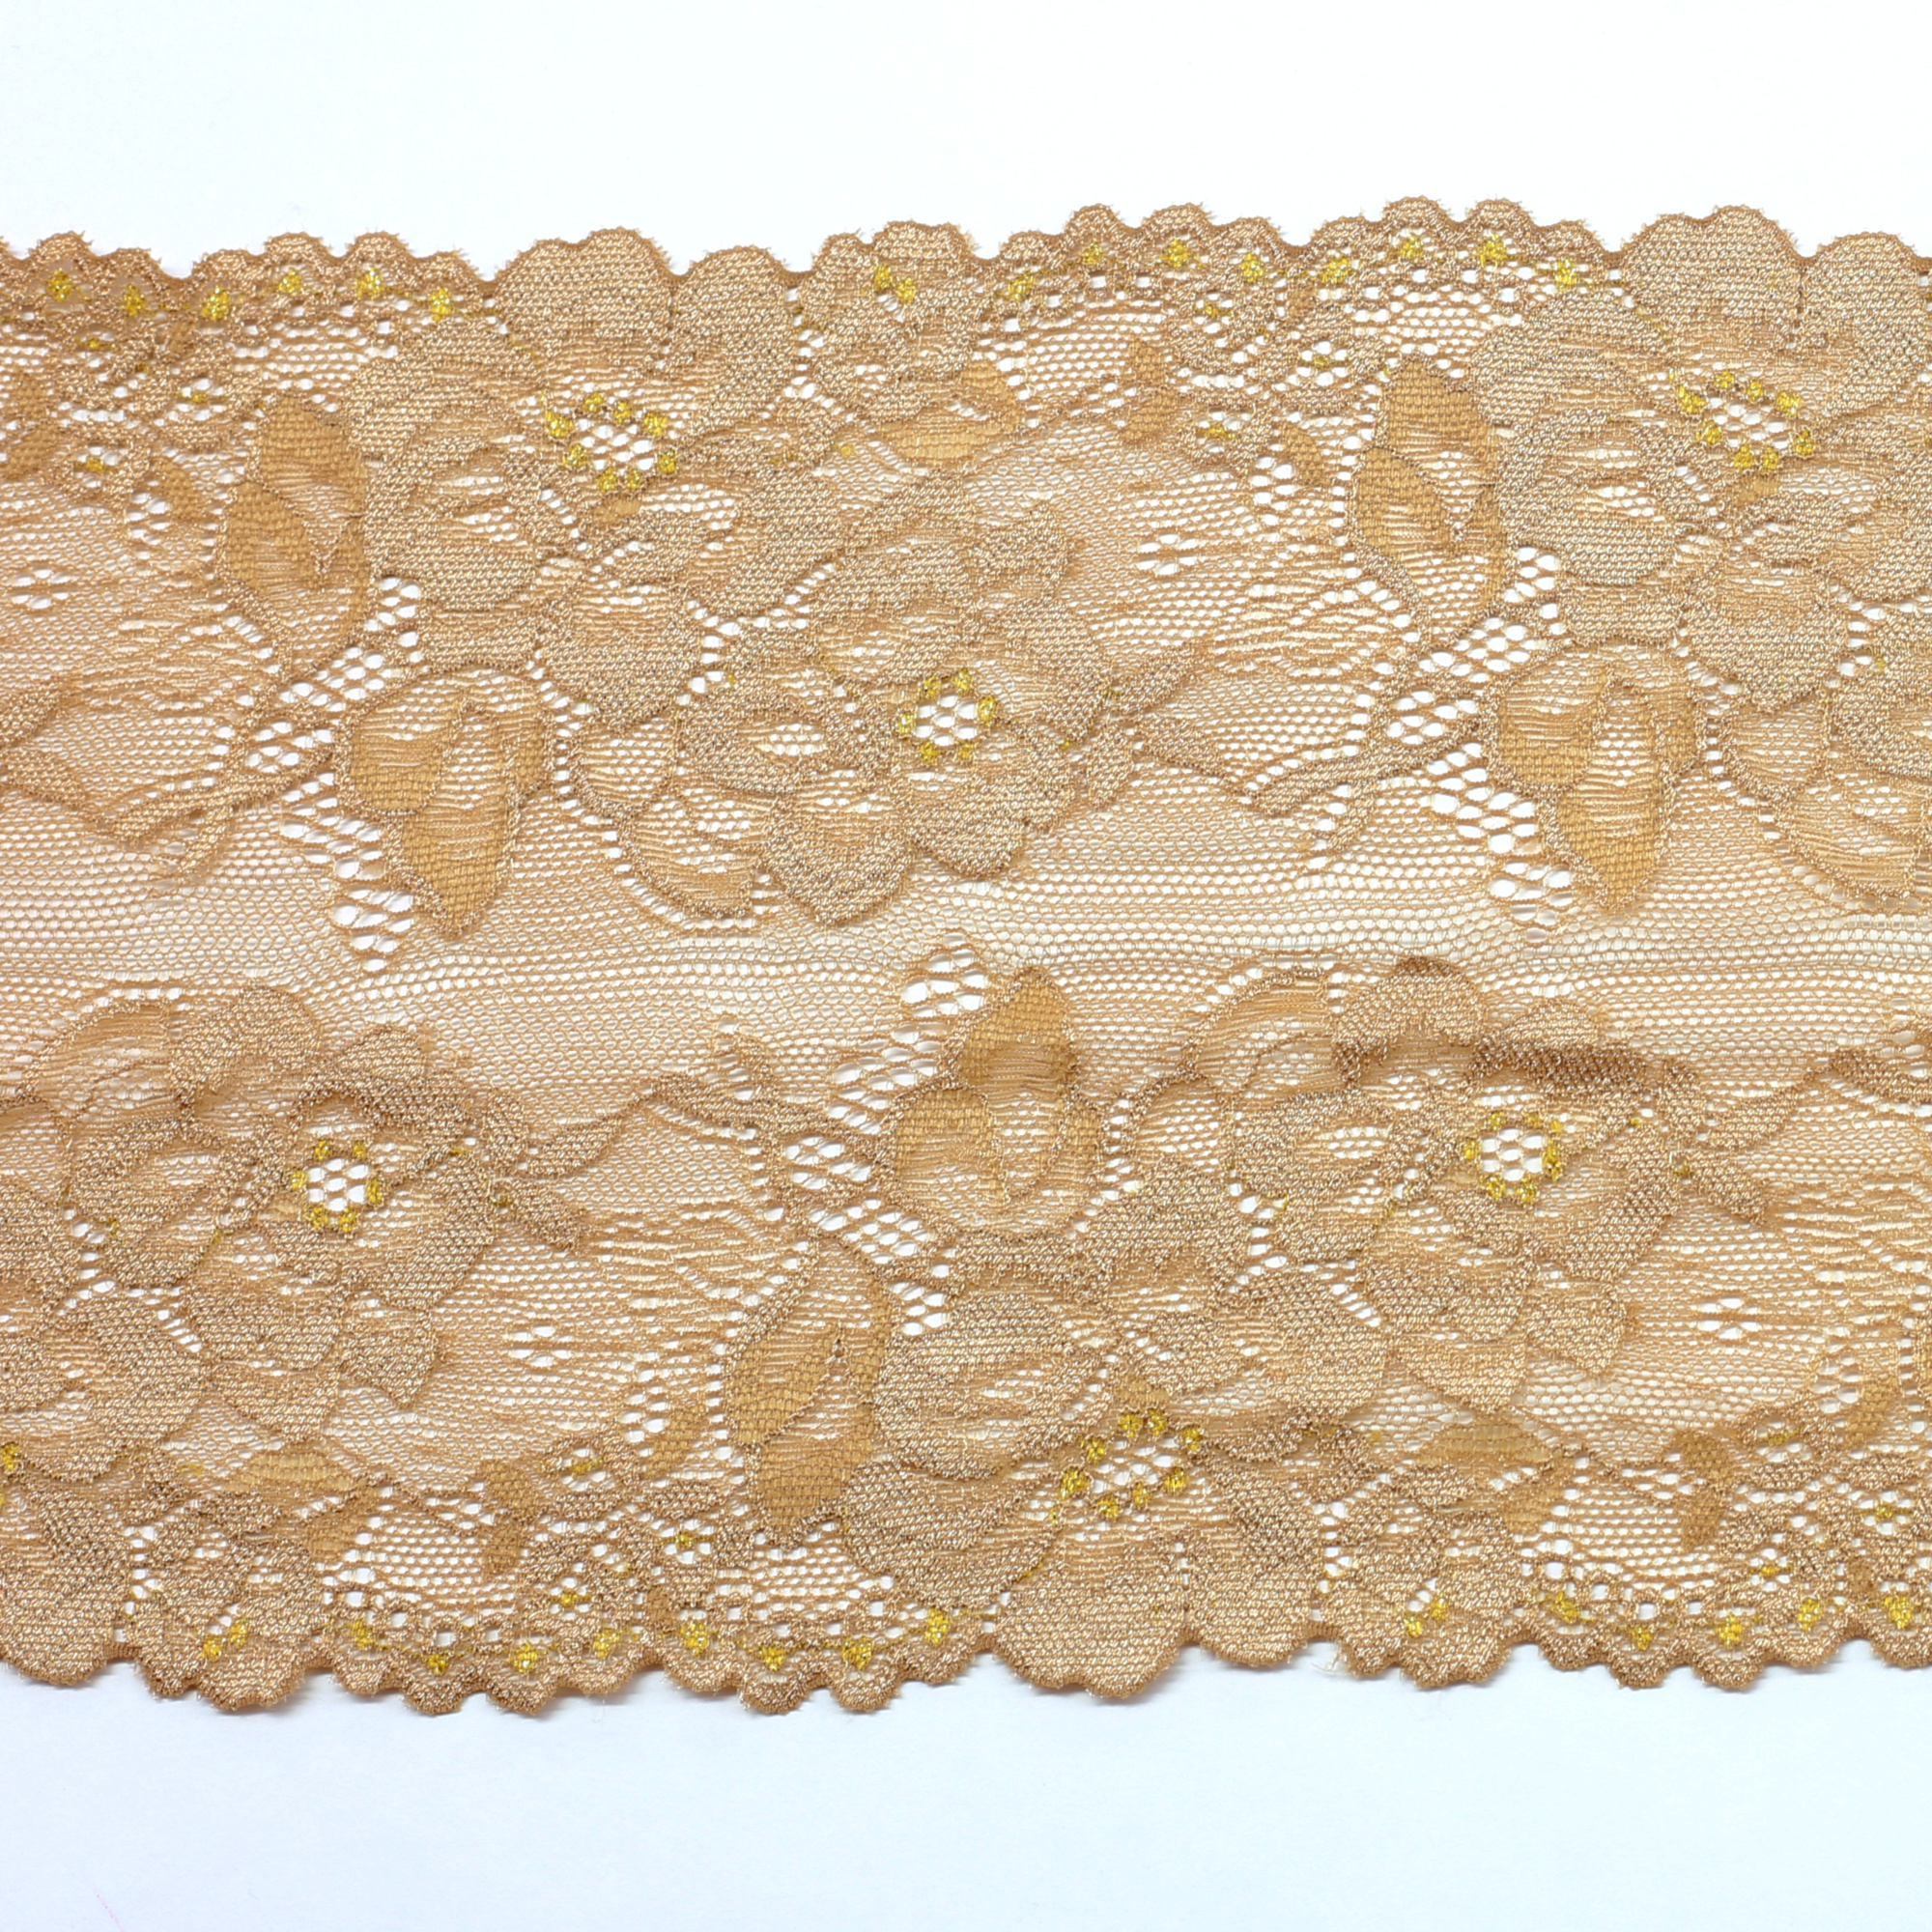 Six Inch Dark Beige Gold Floral Stretch Lace - Bra-Makers Supply